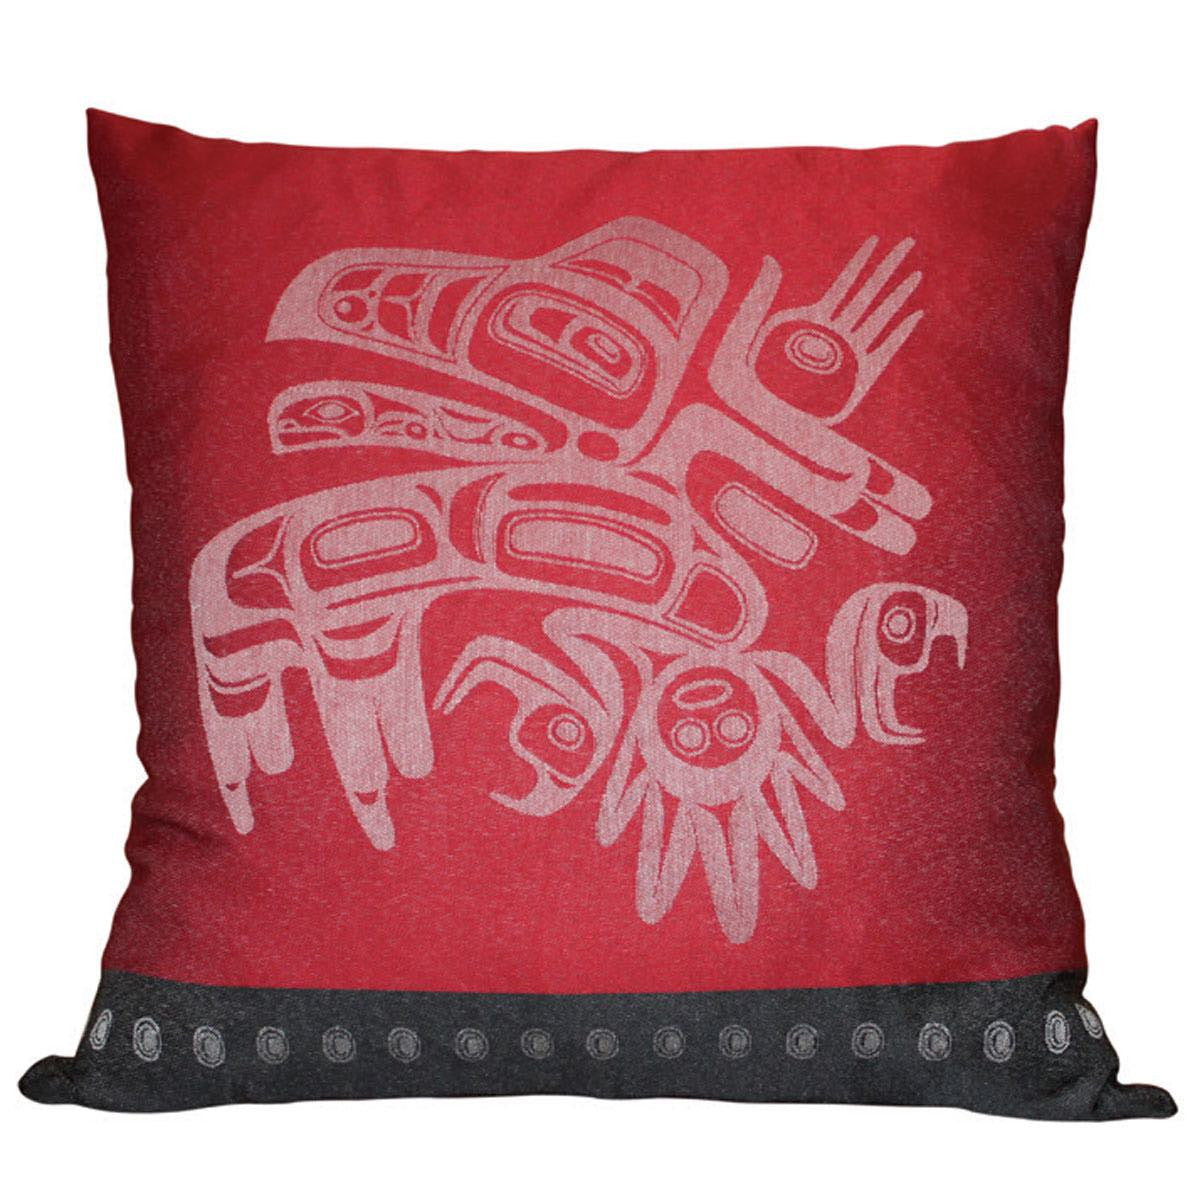 Native Home Decorative Pillow Cover - "Running Raven" by Morgan Asoyuf